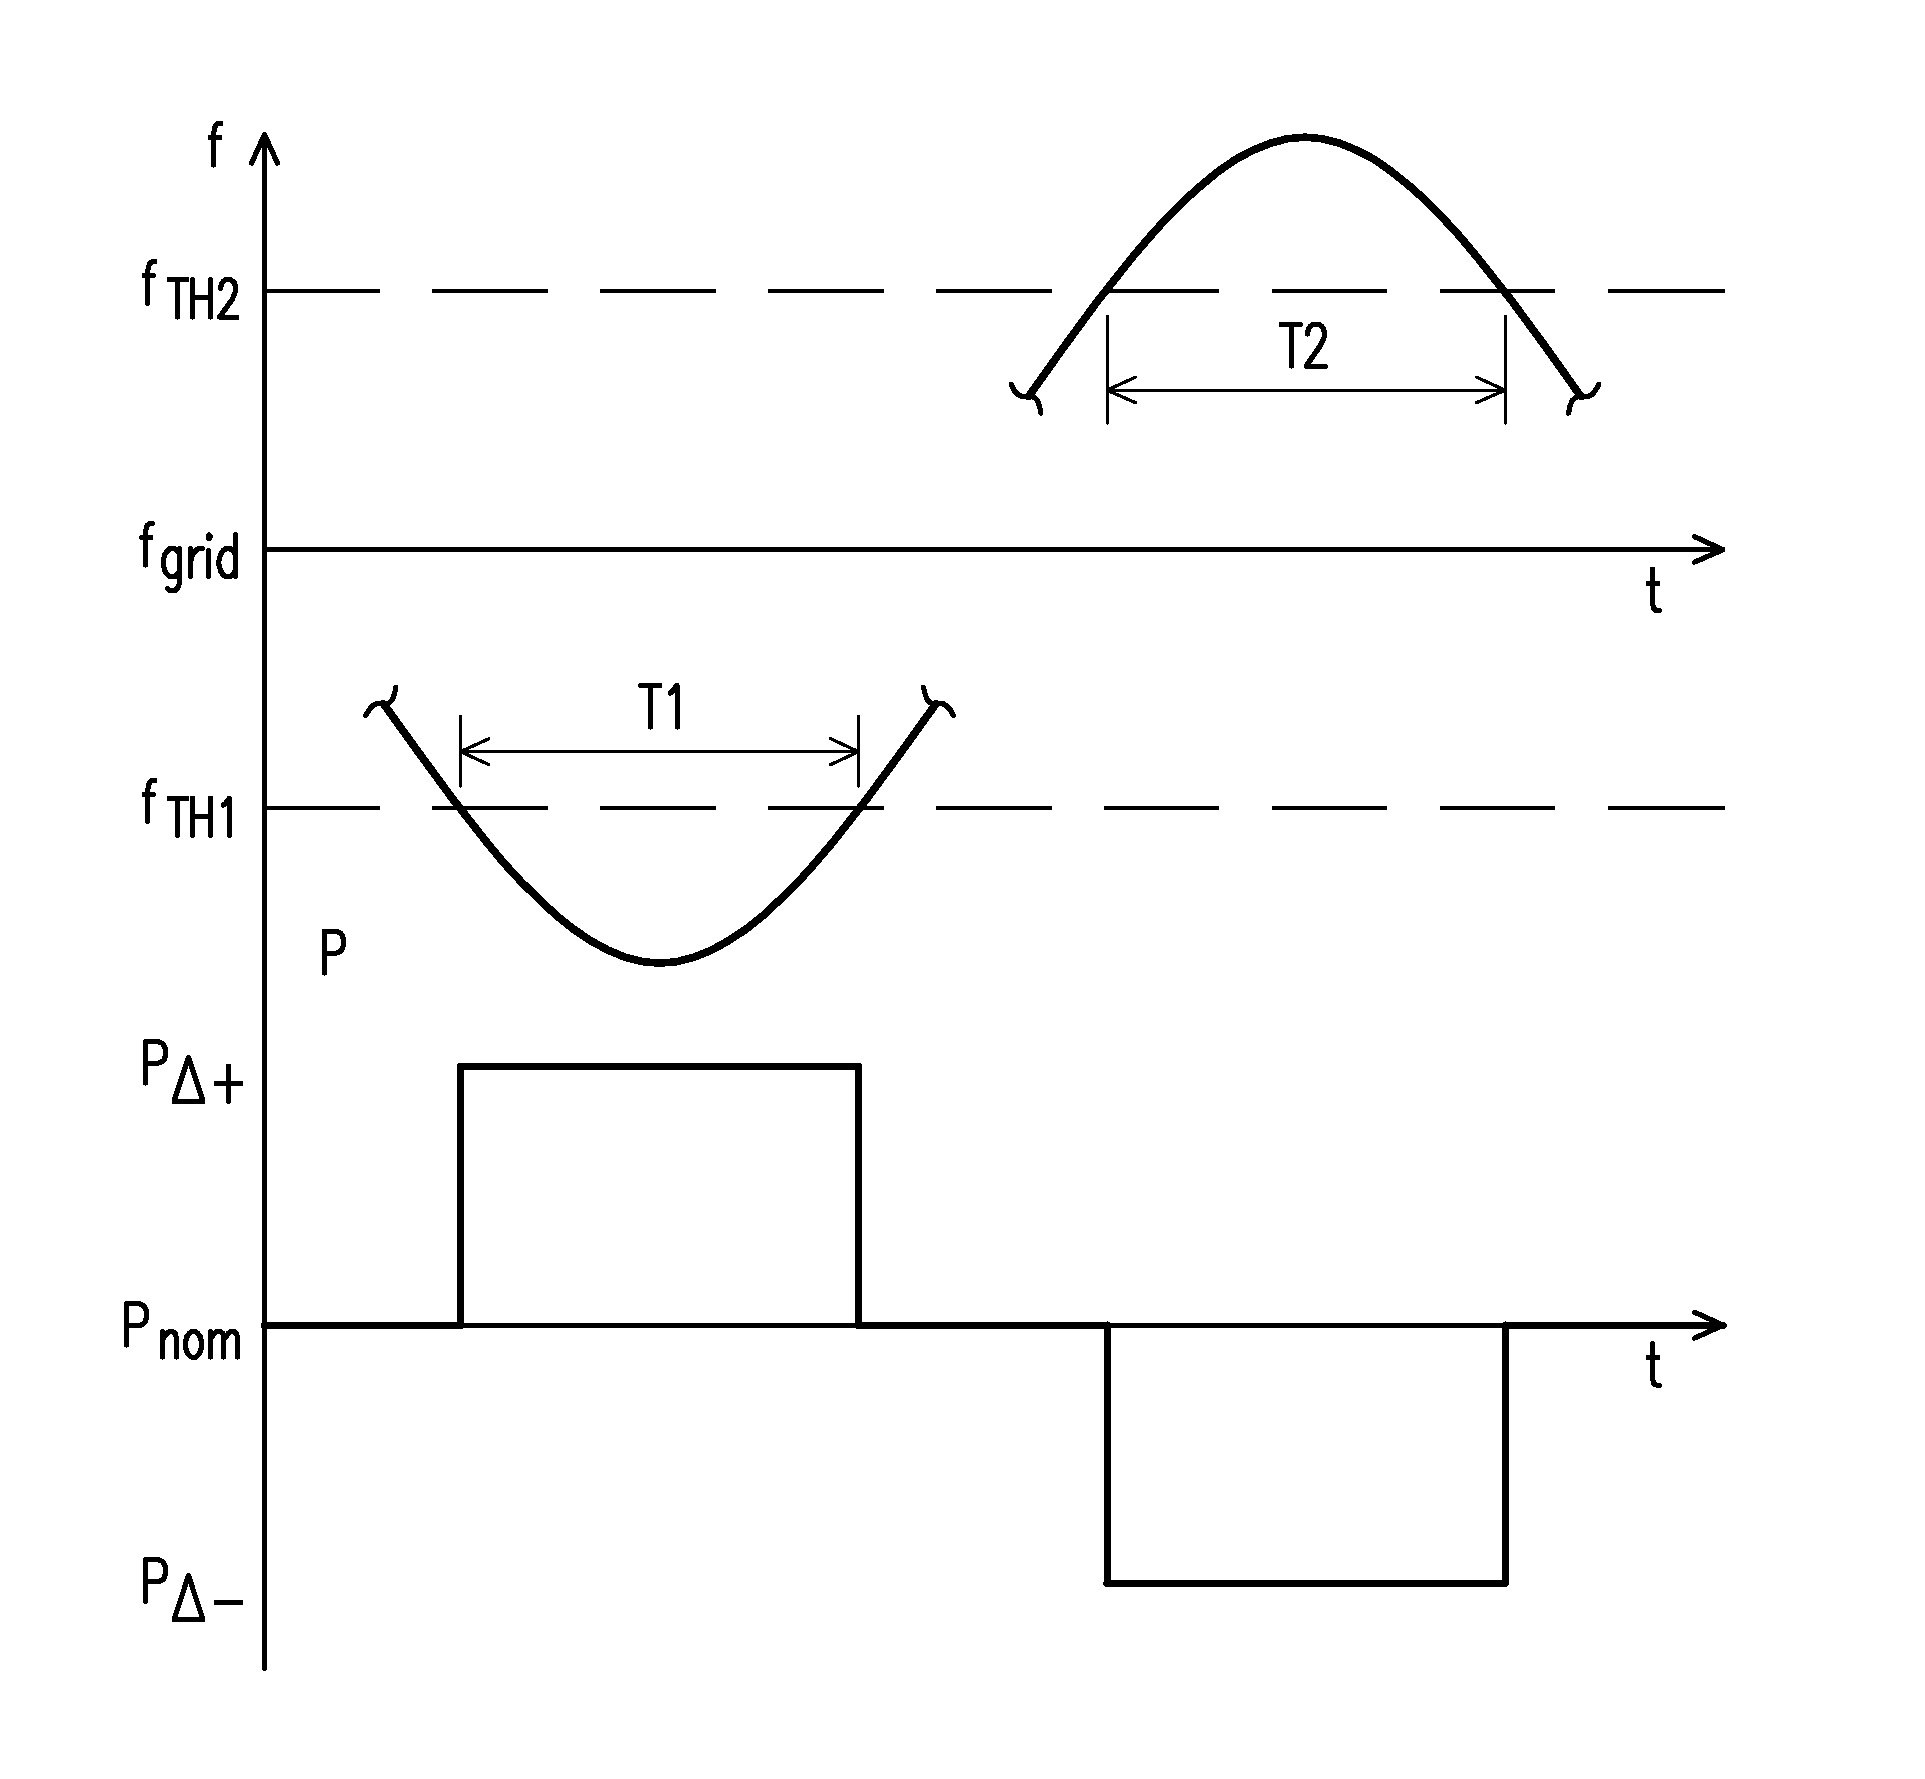 Bang-bang controller and control method for variable speed wind turbines during abnormal frequency conditions